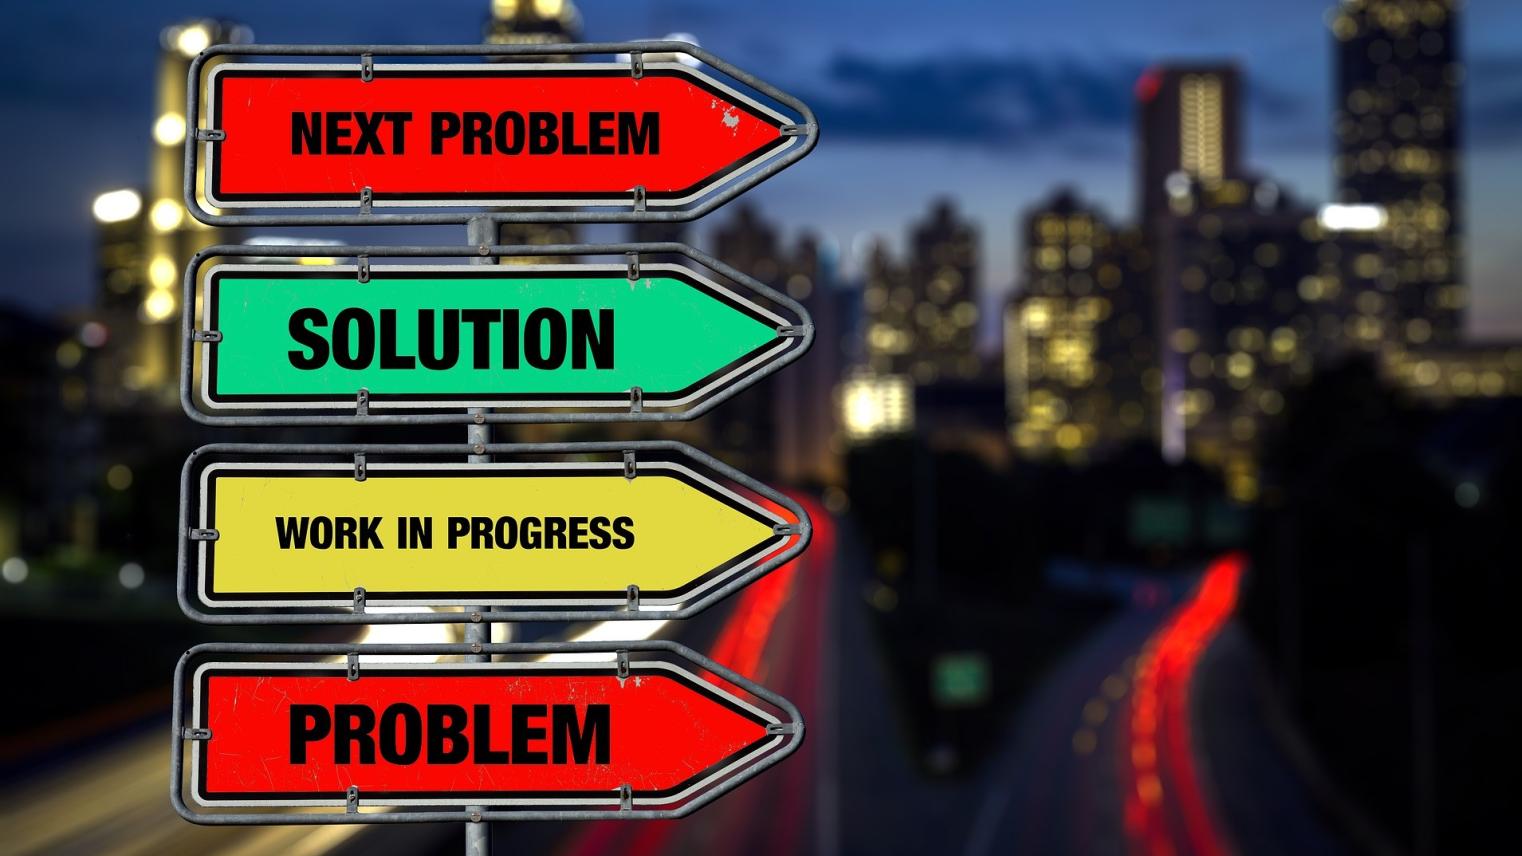 Image credit: Image of flowchart of problem solving steps illustrated as road signs from maxpixel